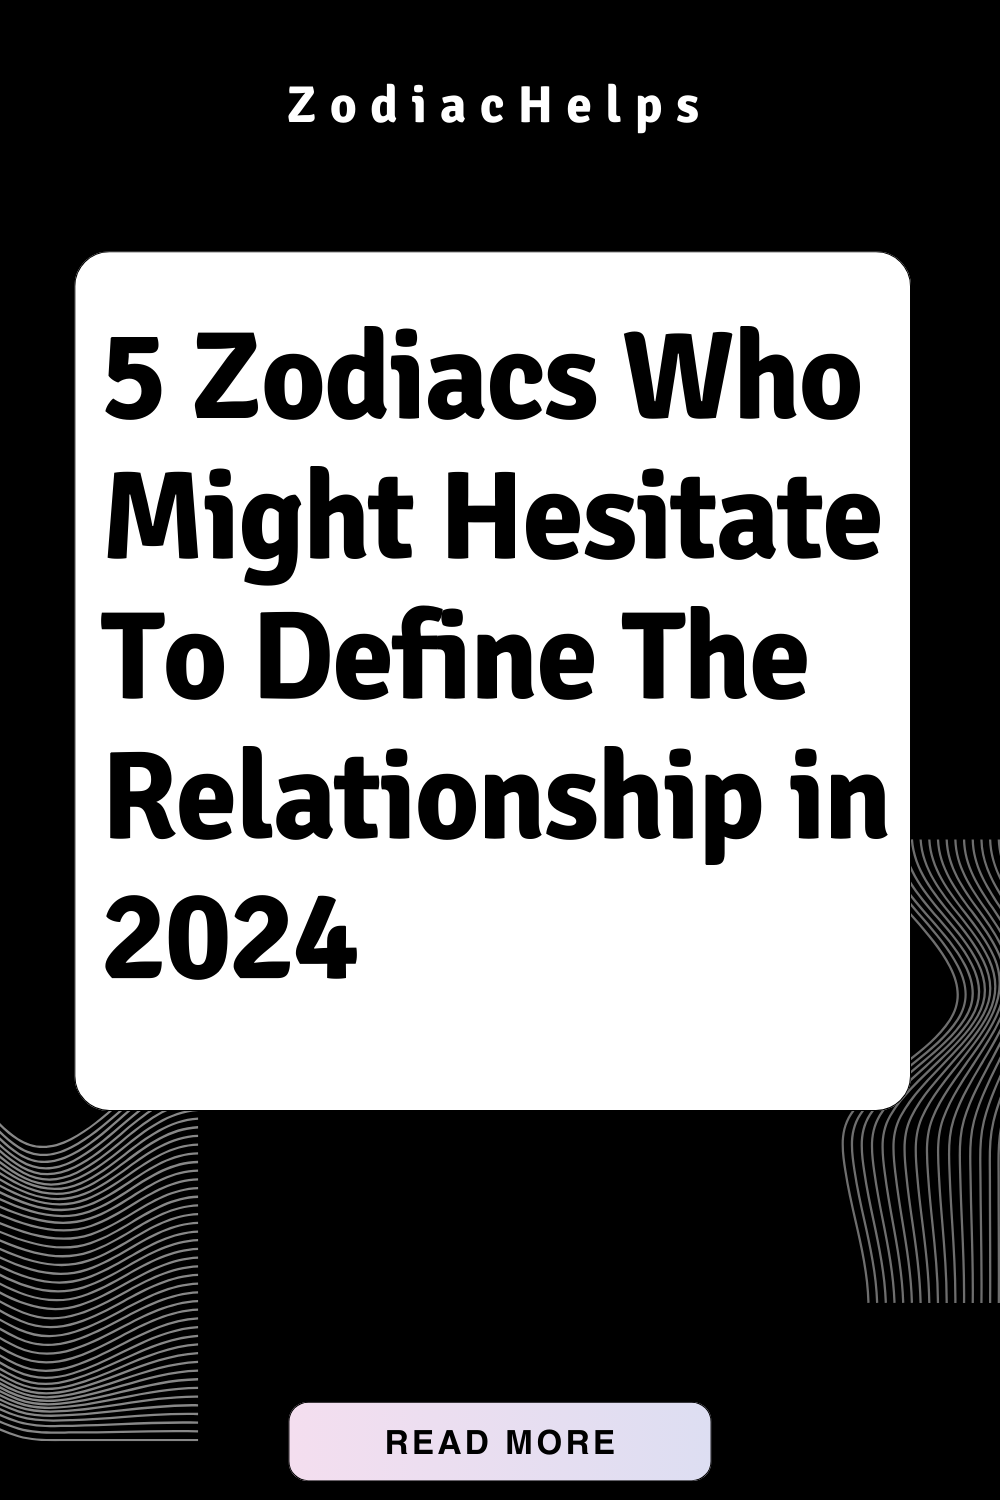 5 Zodiacs Who Might Hesitate To Define The Relationship in 2024